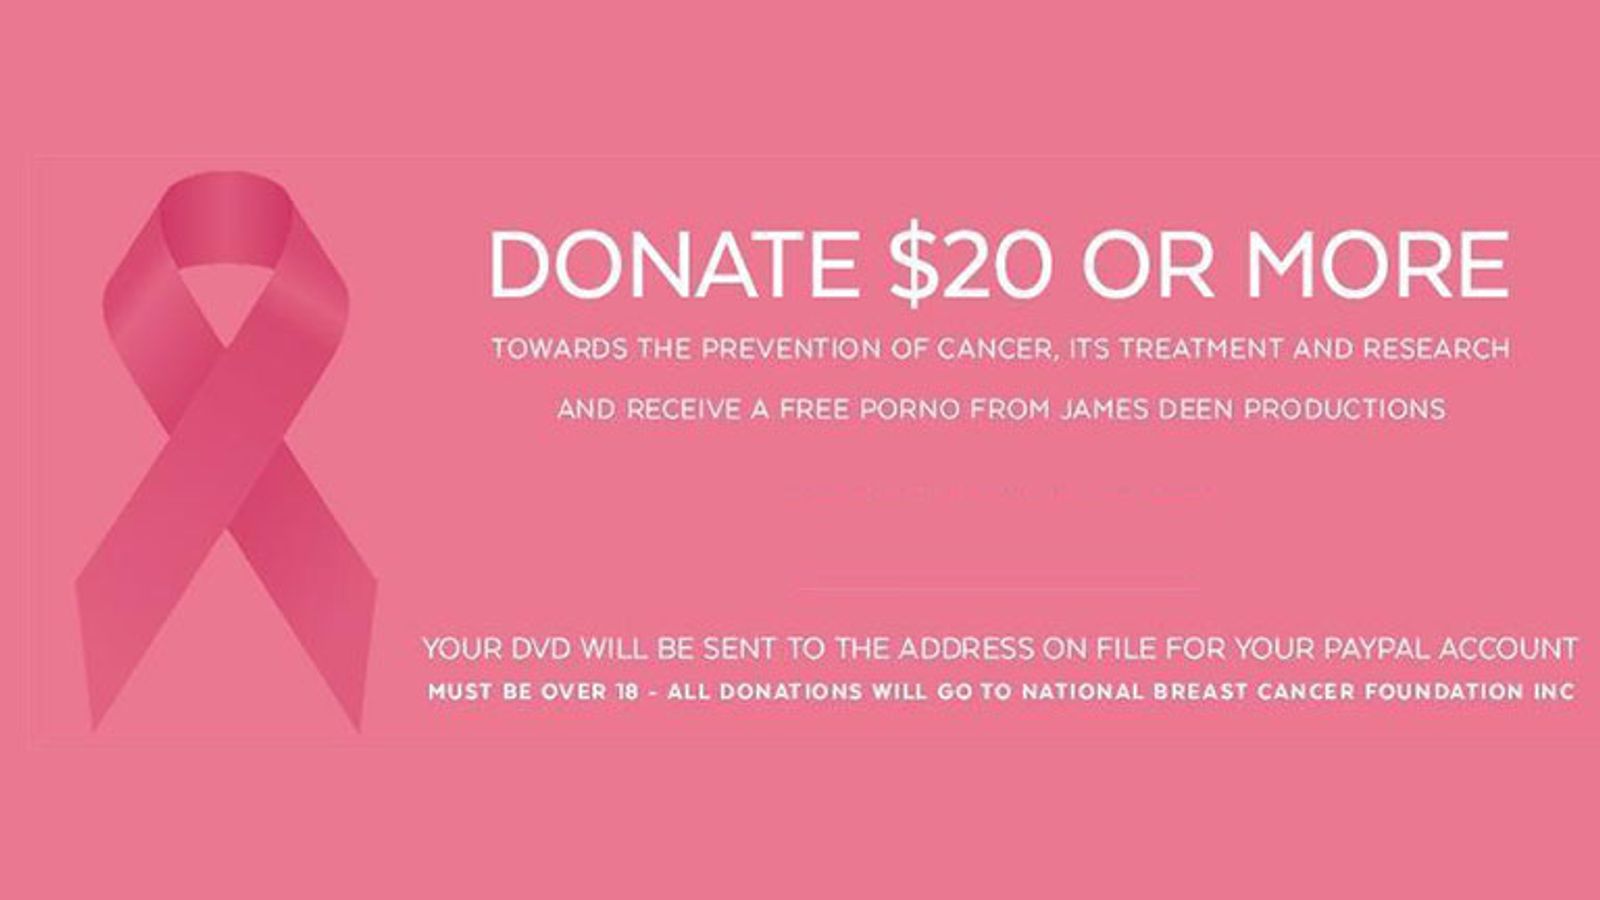 James Deen Kicks Off 3rd Annual Fundraiser for Breast Cancer Prevention